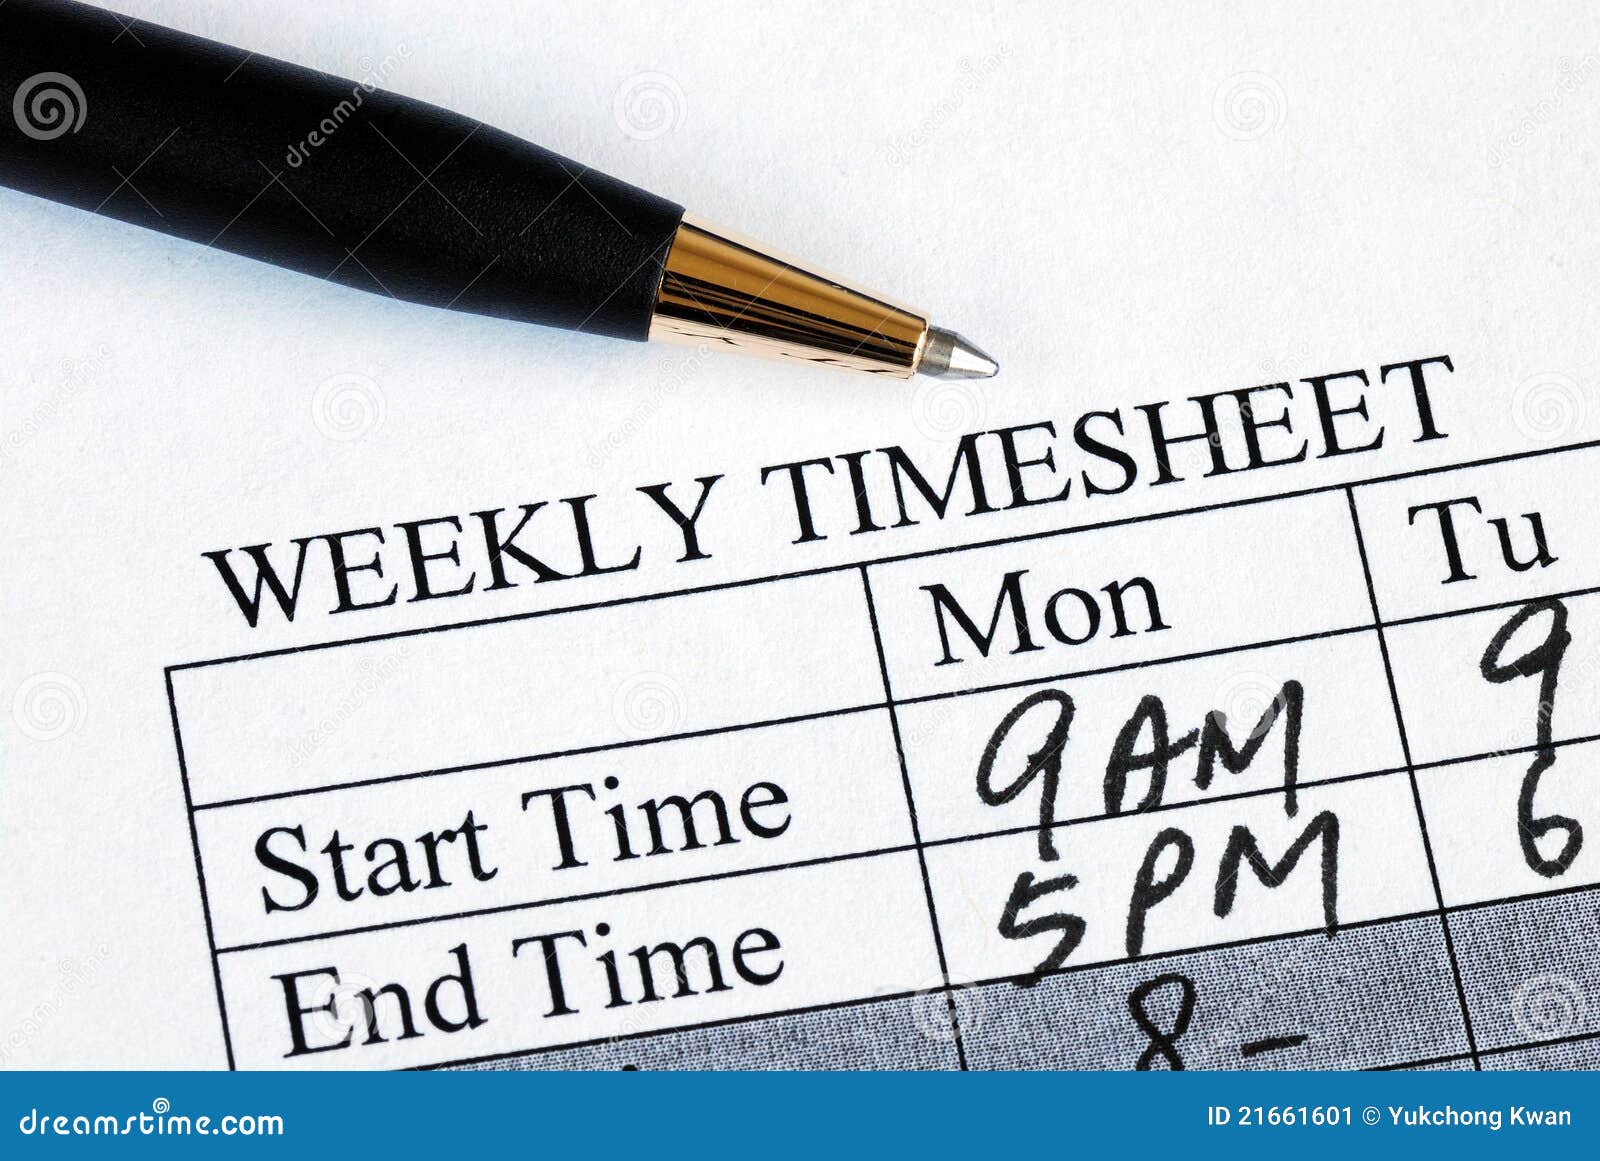 enter the weekly time sheet